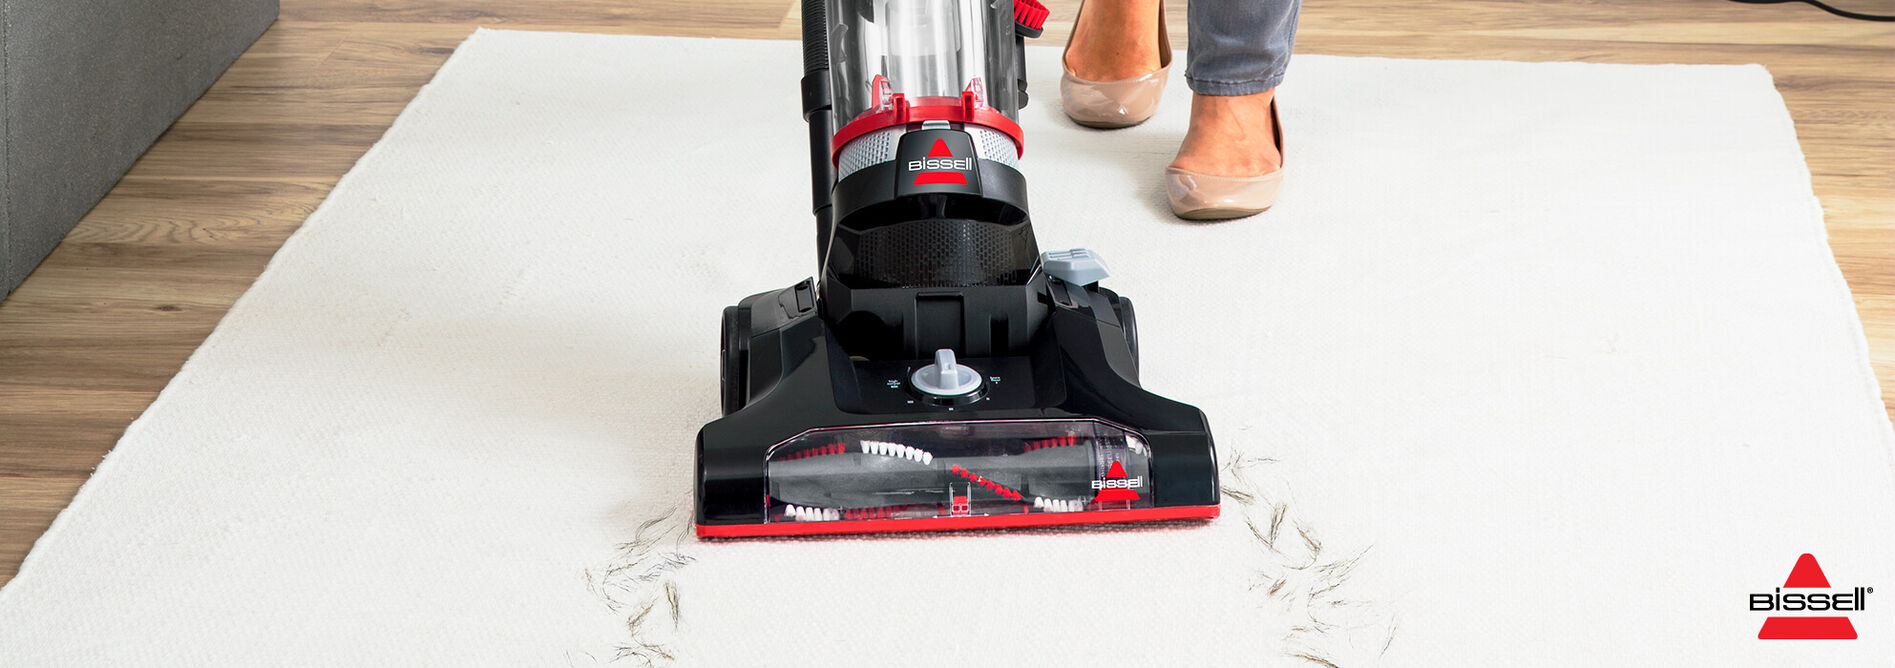 BISSELL PowerForce Helix Turbo Pet Upright Vacuum 3332 